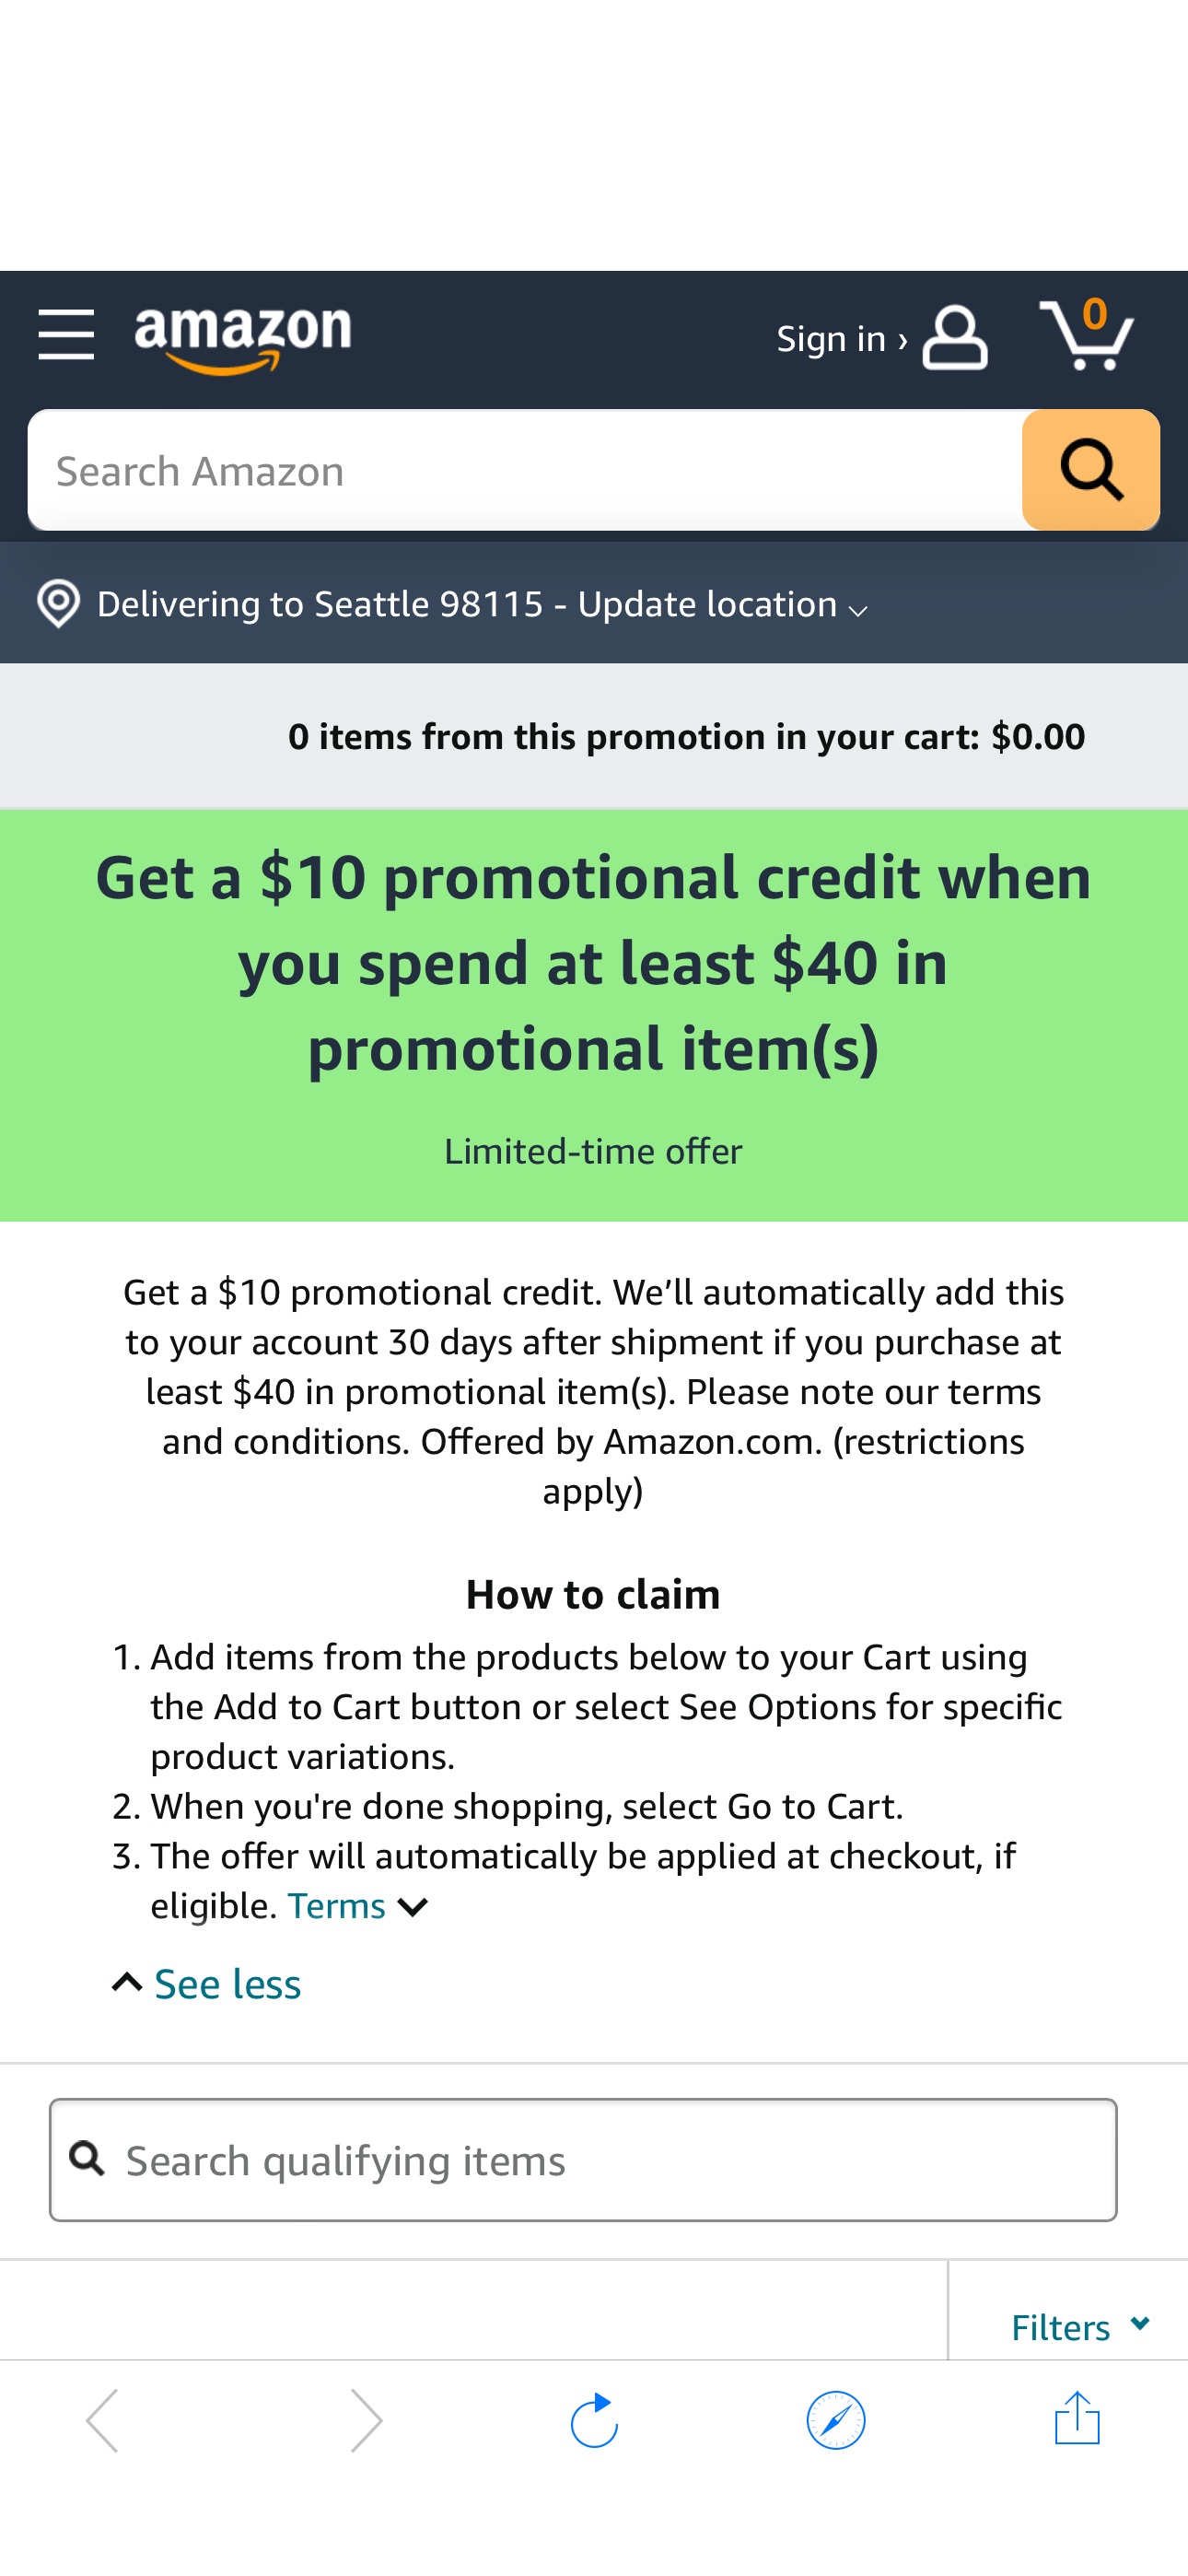 Amazon.com: Get a $10 promotional credit when you spend at least $40 in promotional item(s) promotion